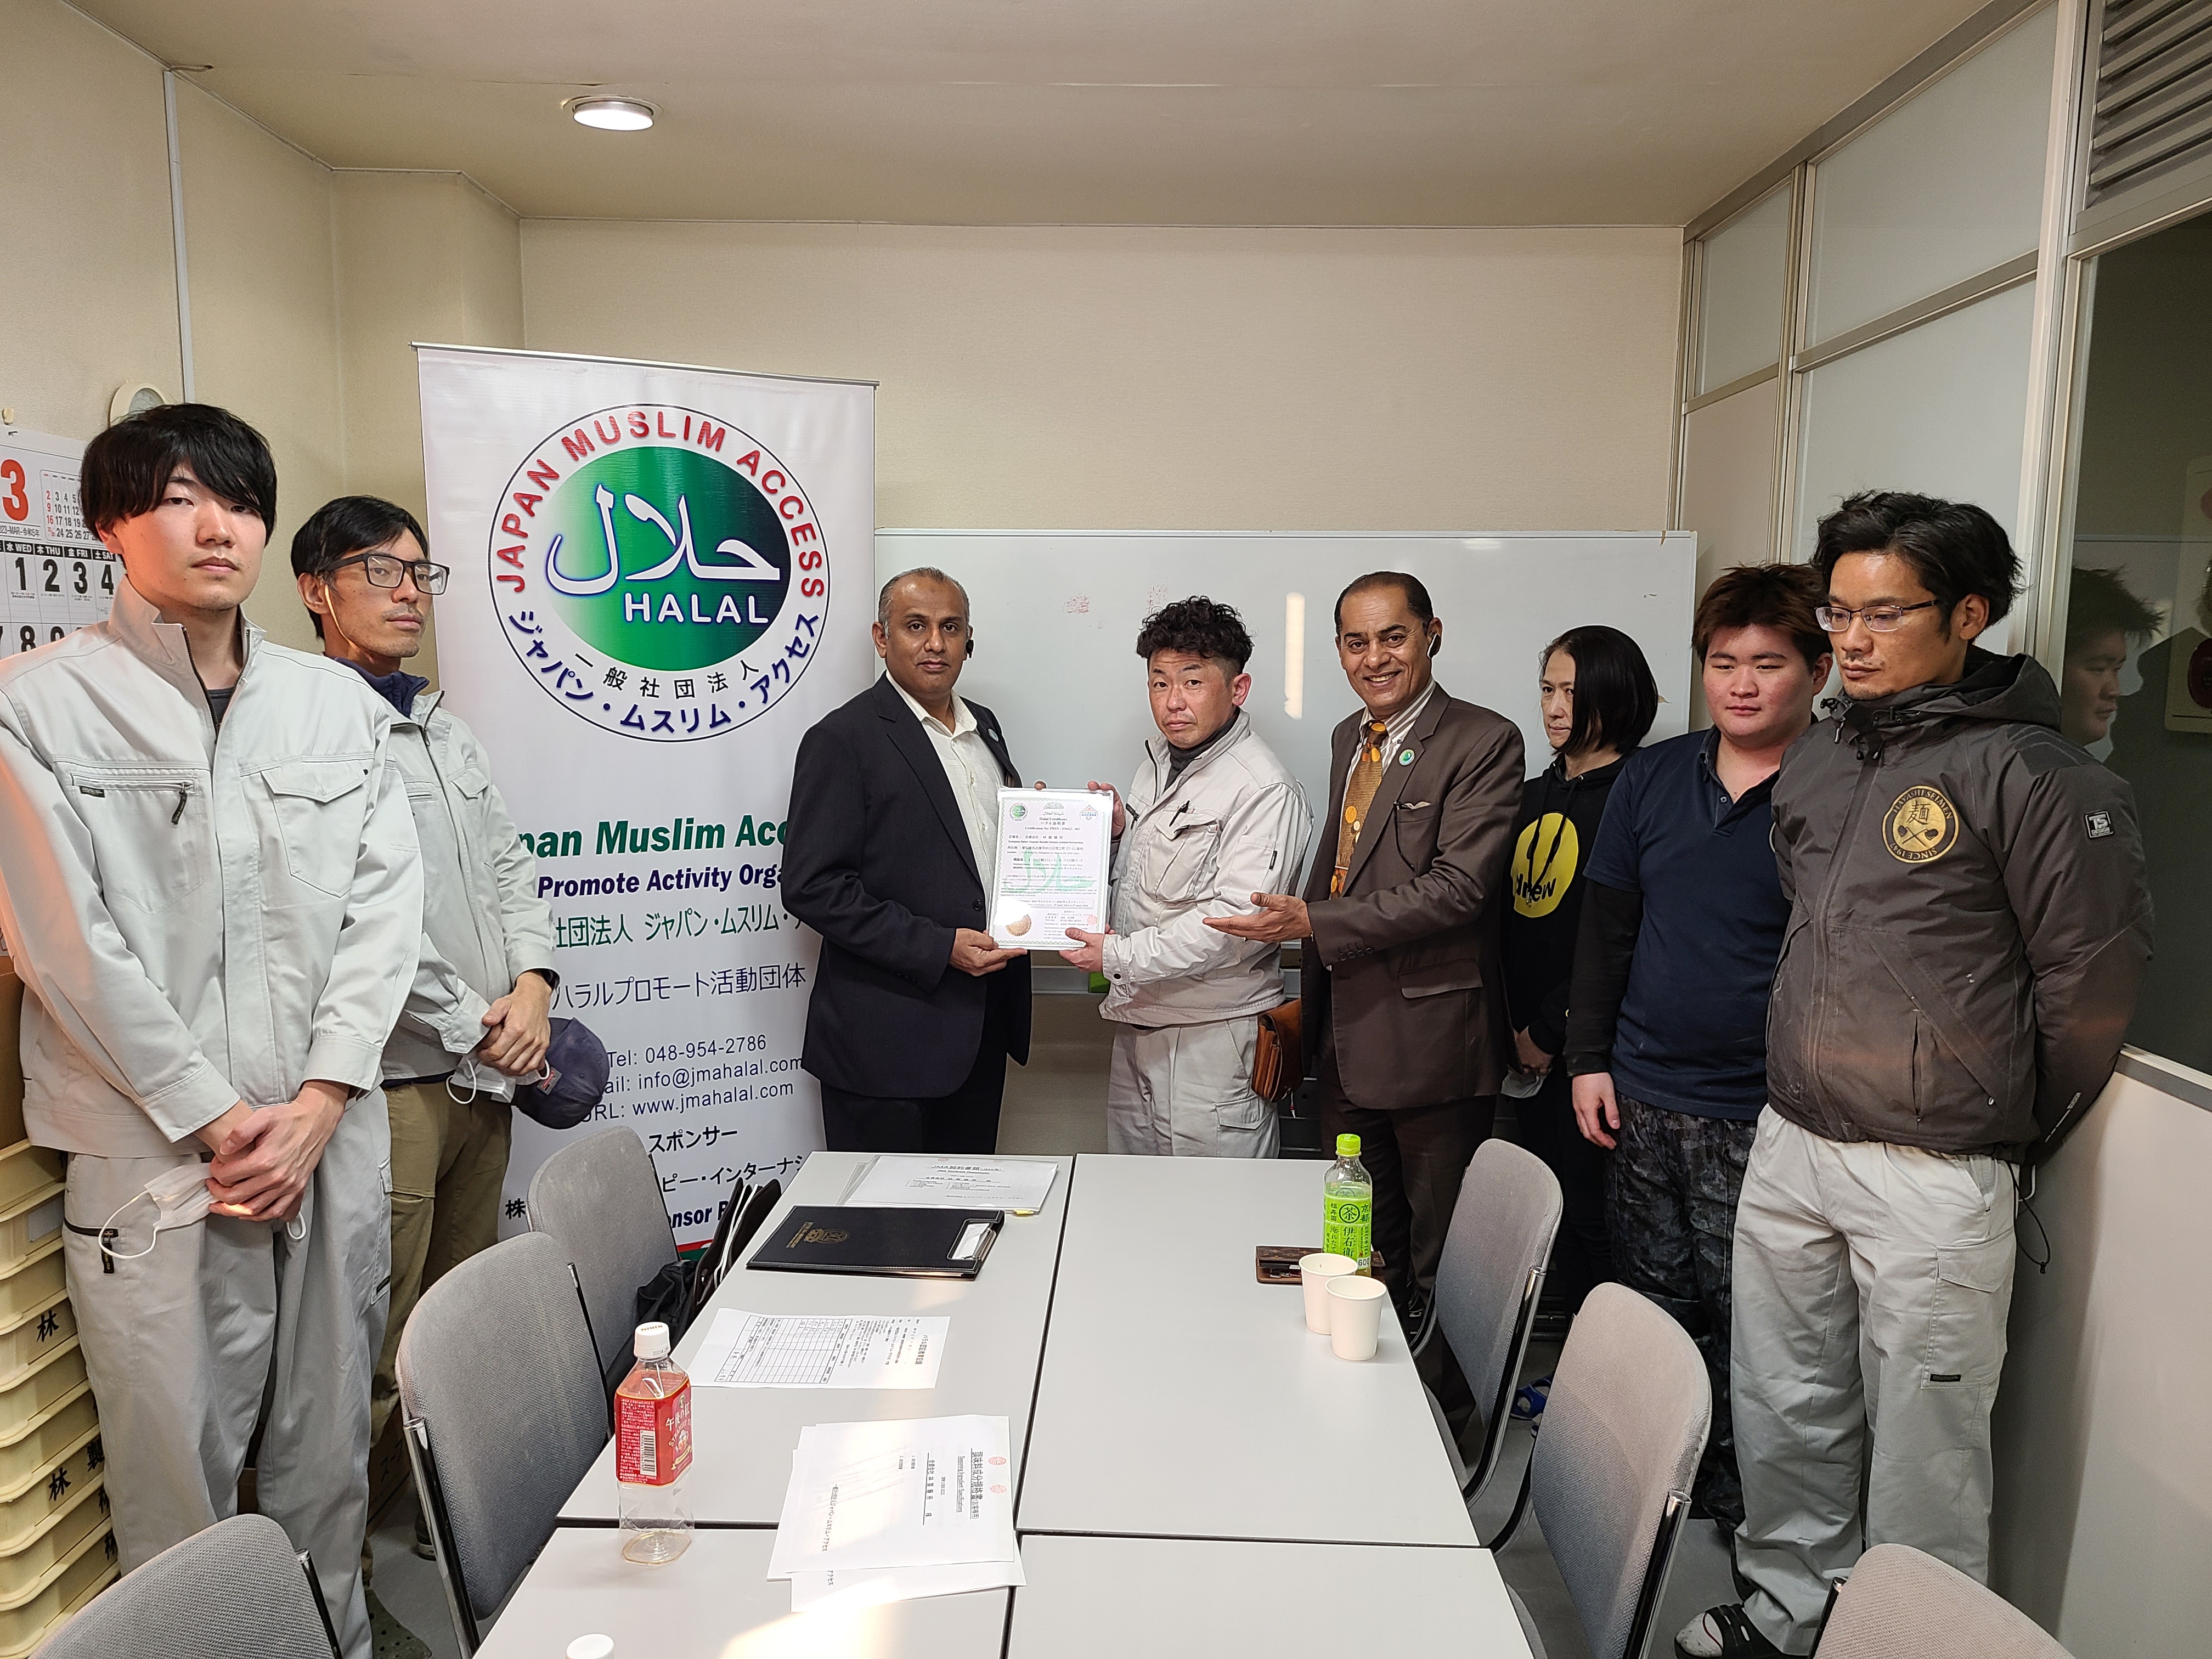 We have renewed the halal certificate for FY2023 at 